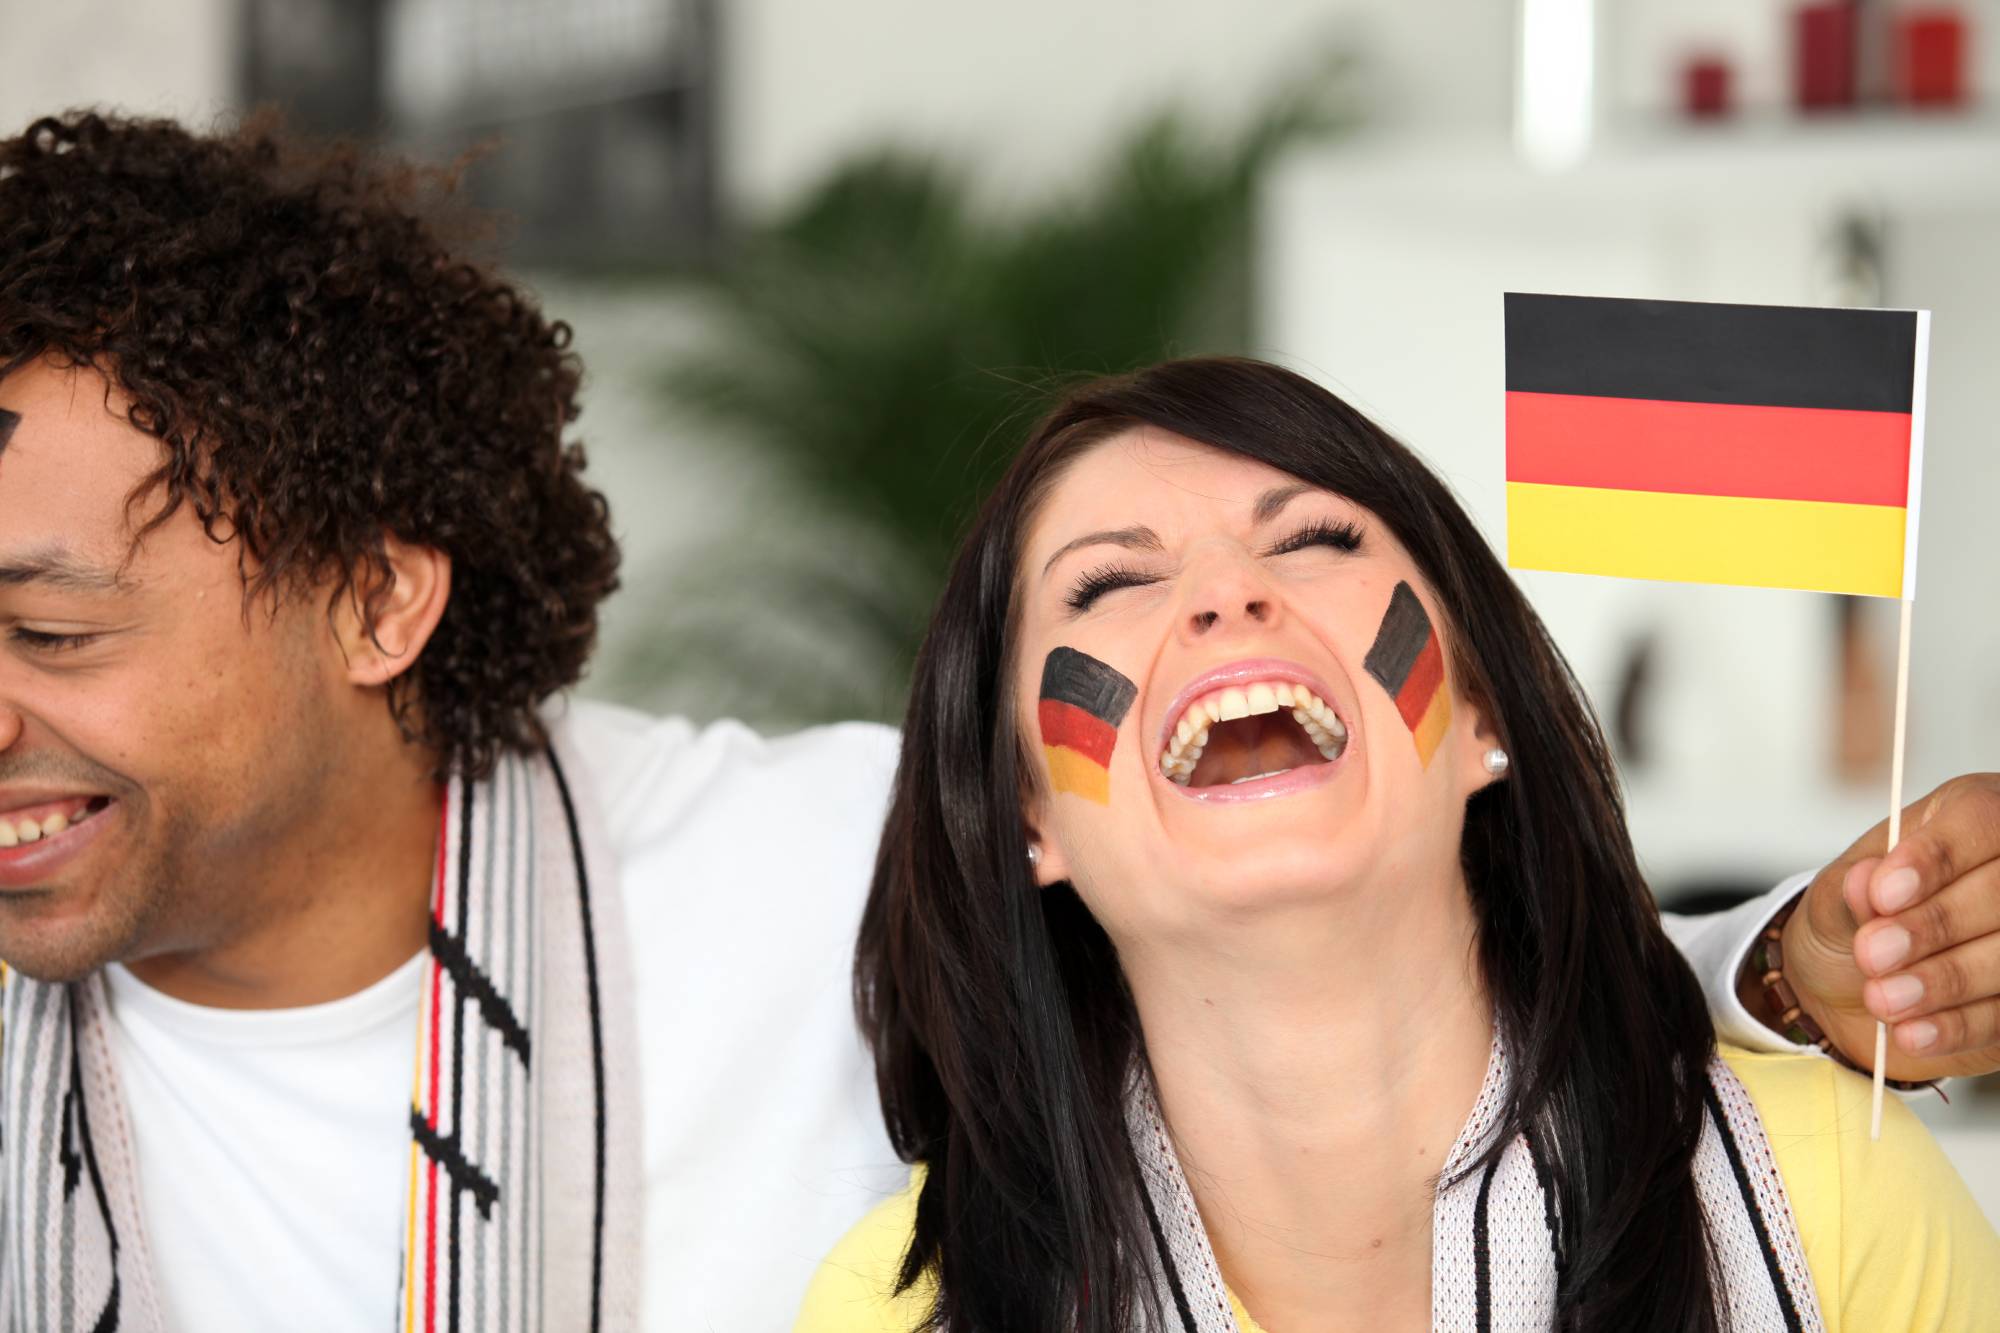 Couple holding a German flag and laughing